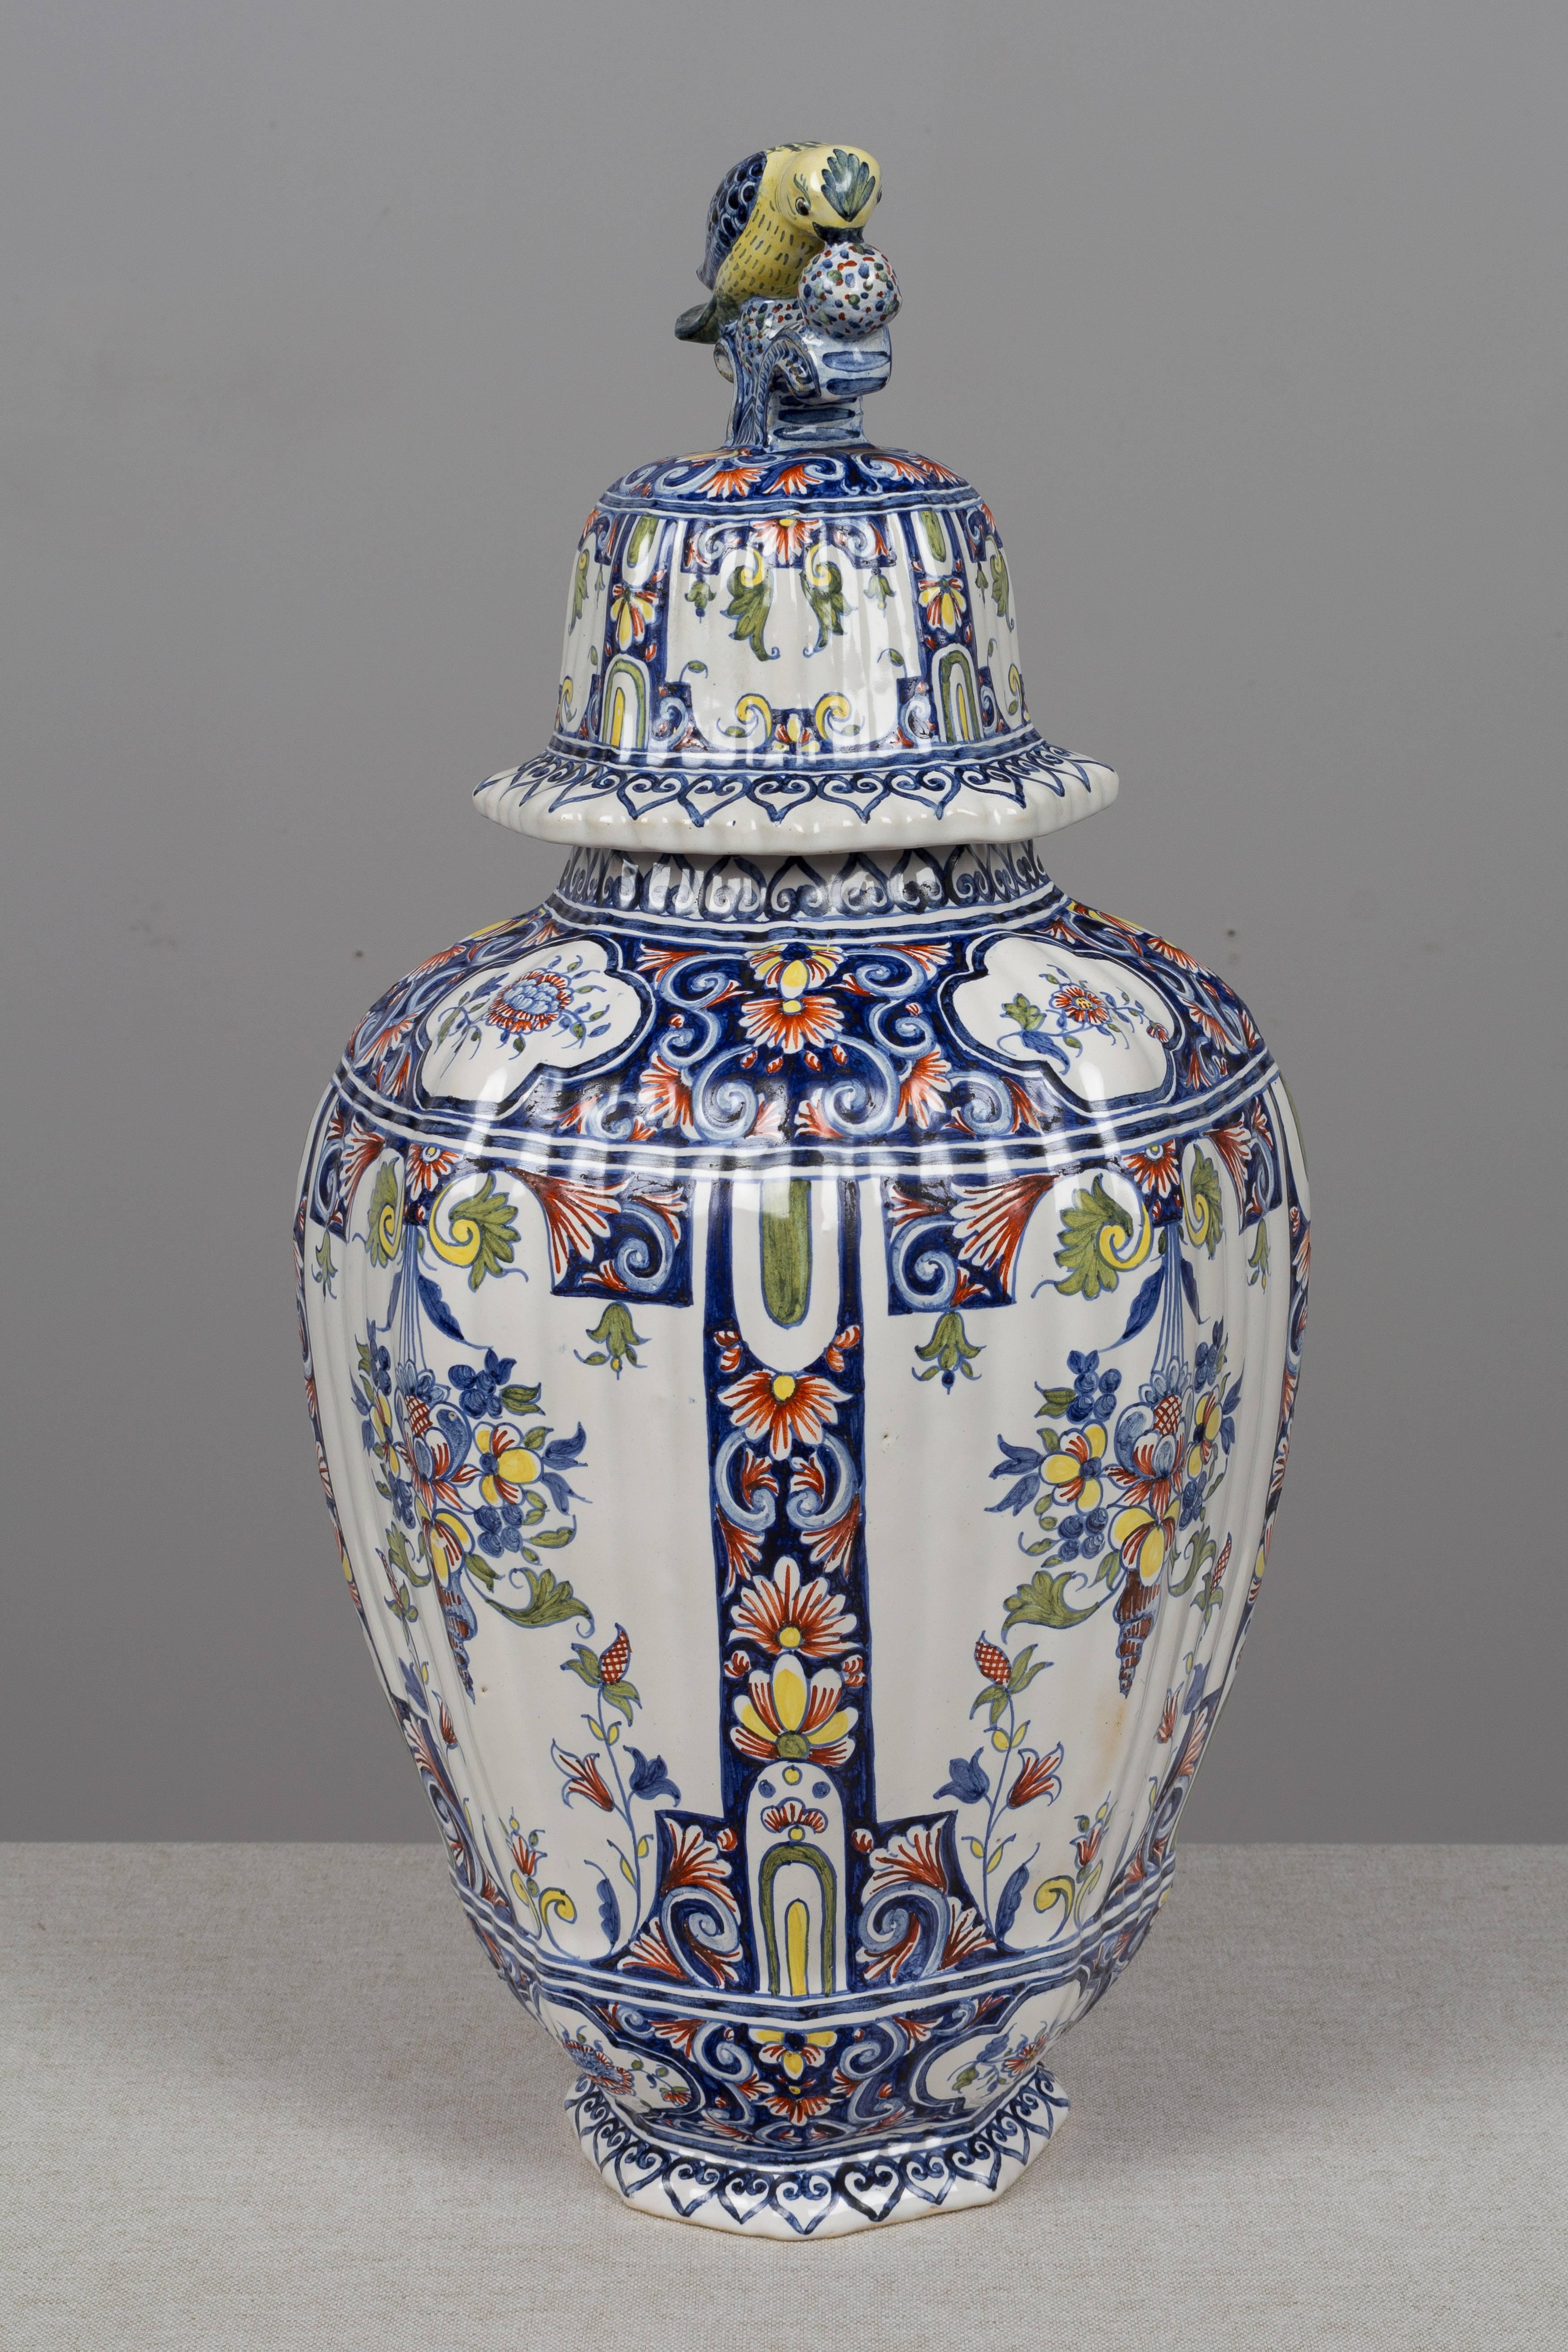 A large 19th century delft faience octagonal ginger jar with colorful hand-painted floral decoration. Domed lid with a bird perched on top. Please refer to photos for more details. We have a large selection of French antiques at Olivier Fleury, Inc.